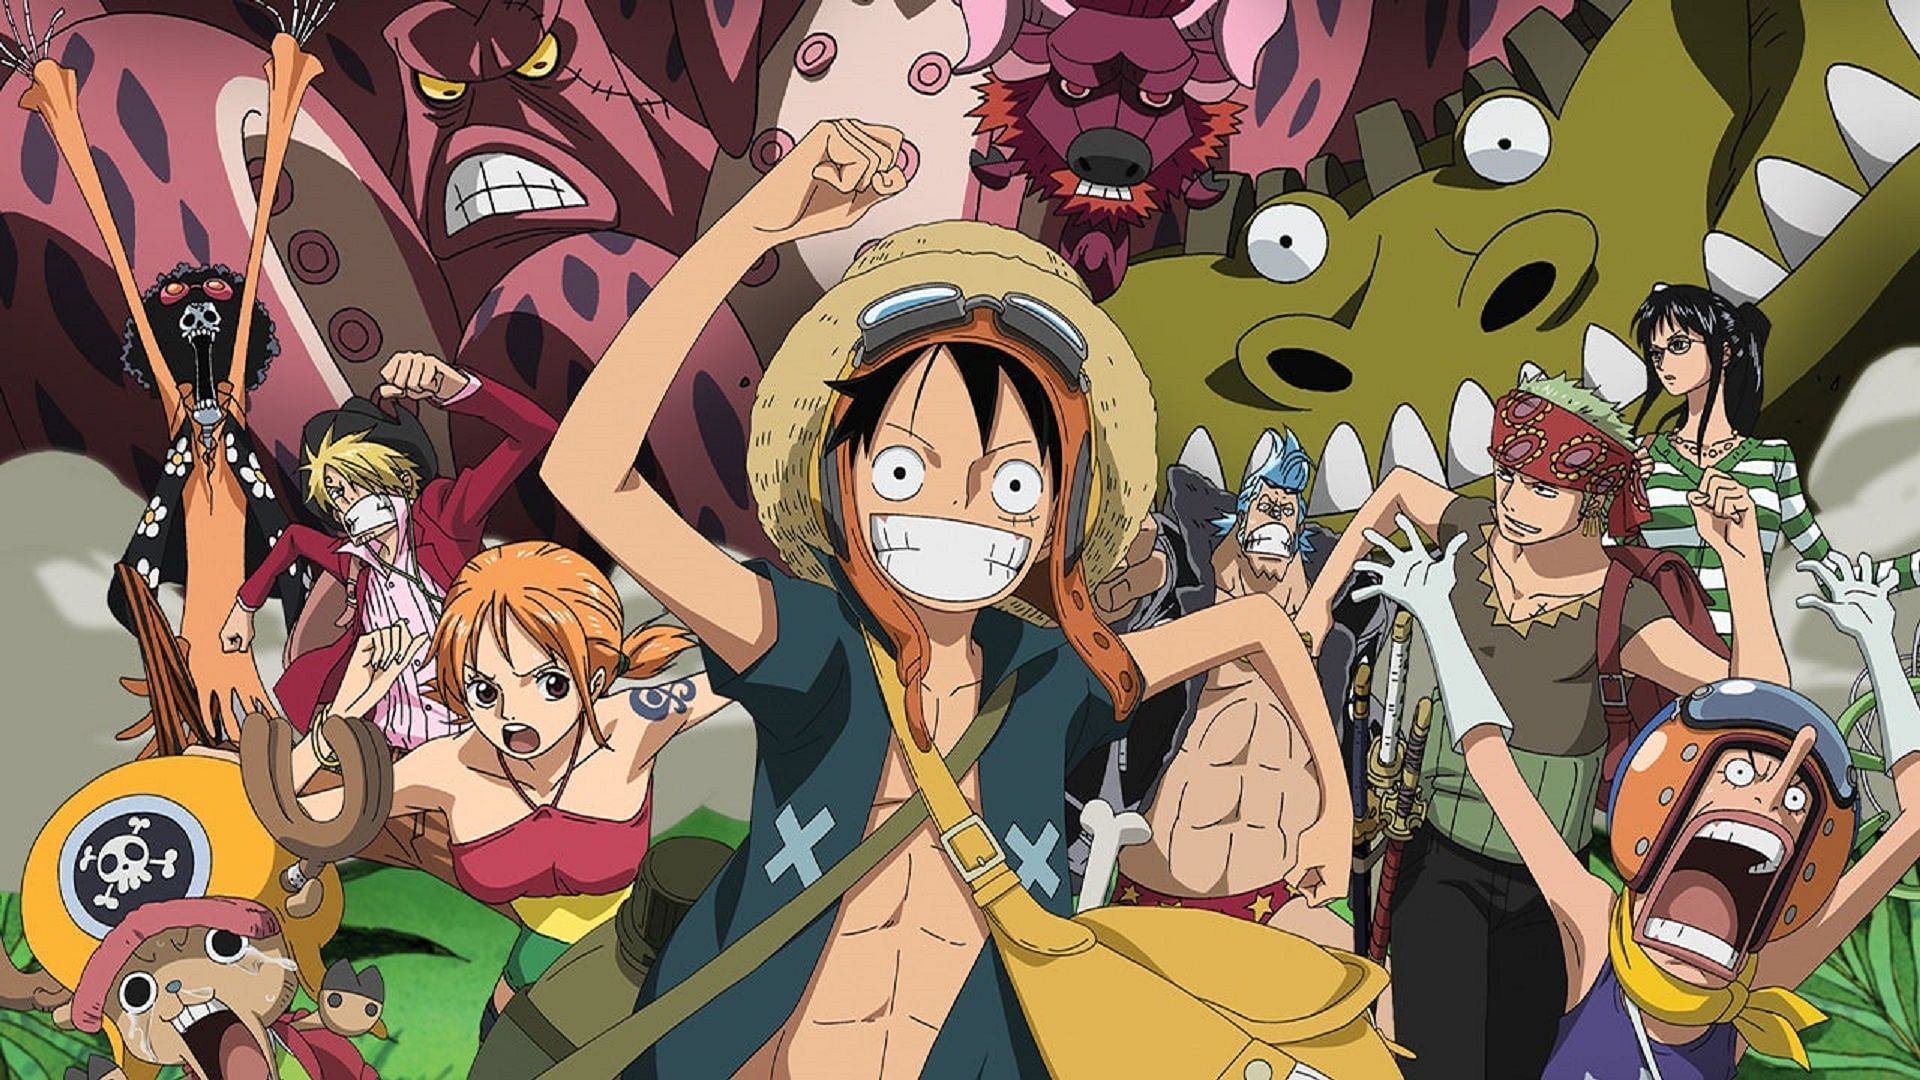 The Straw Hats as seen in Strong World (Image via Toei Animation, One Piece)